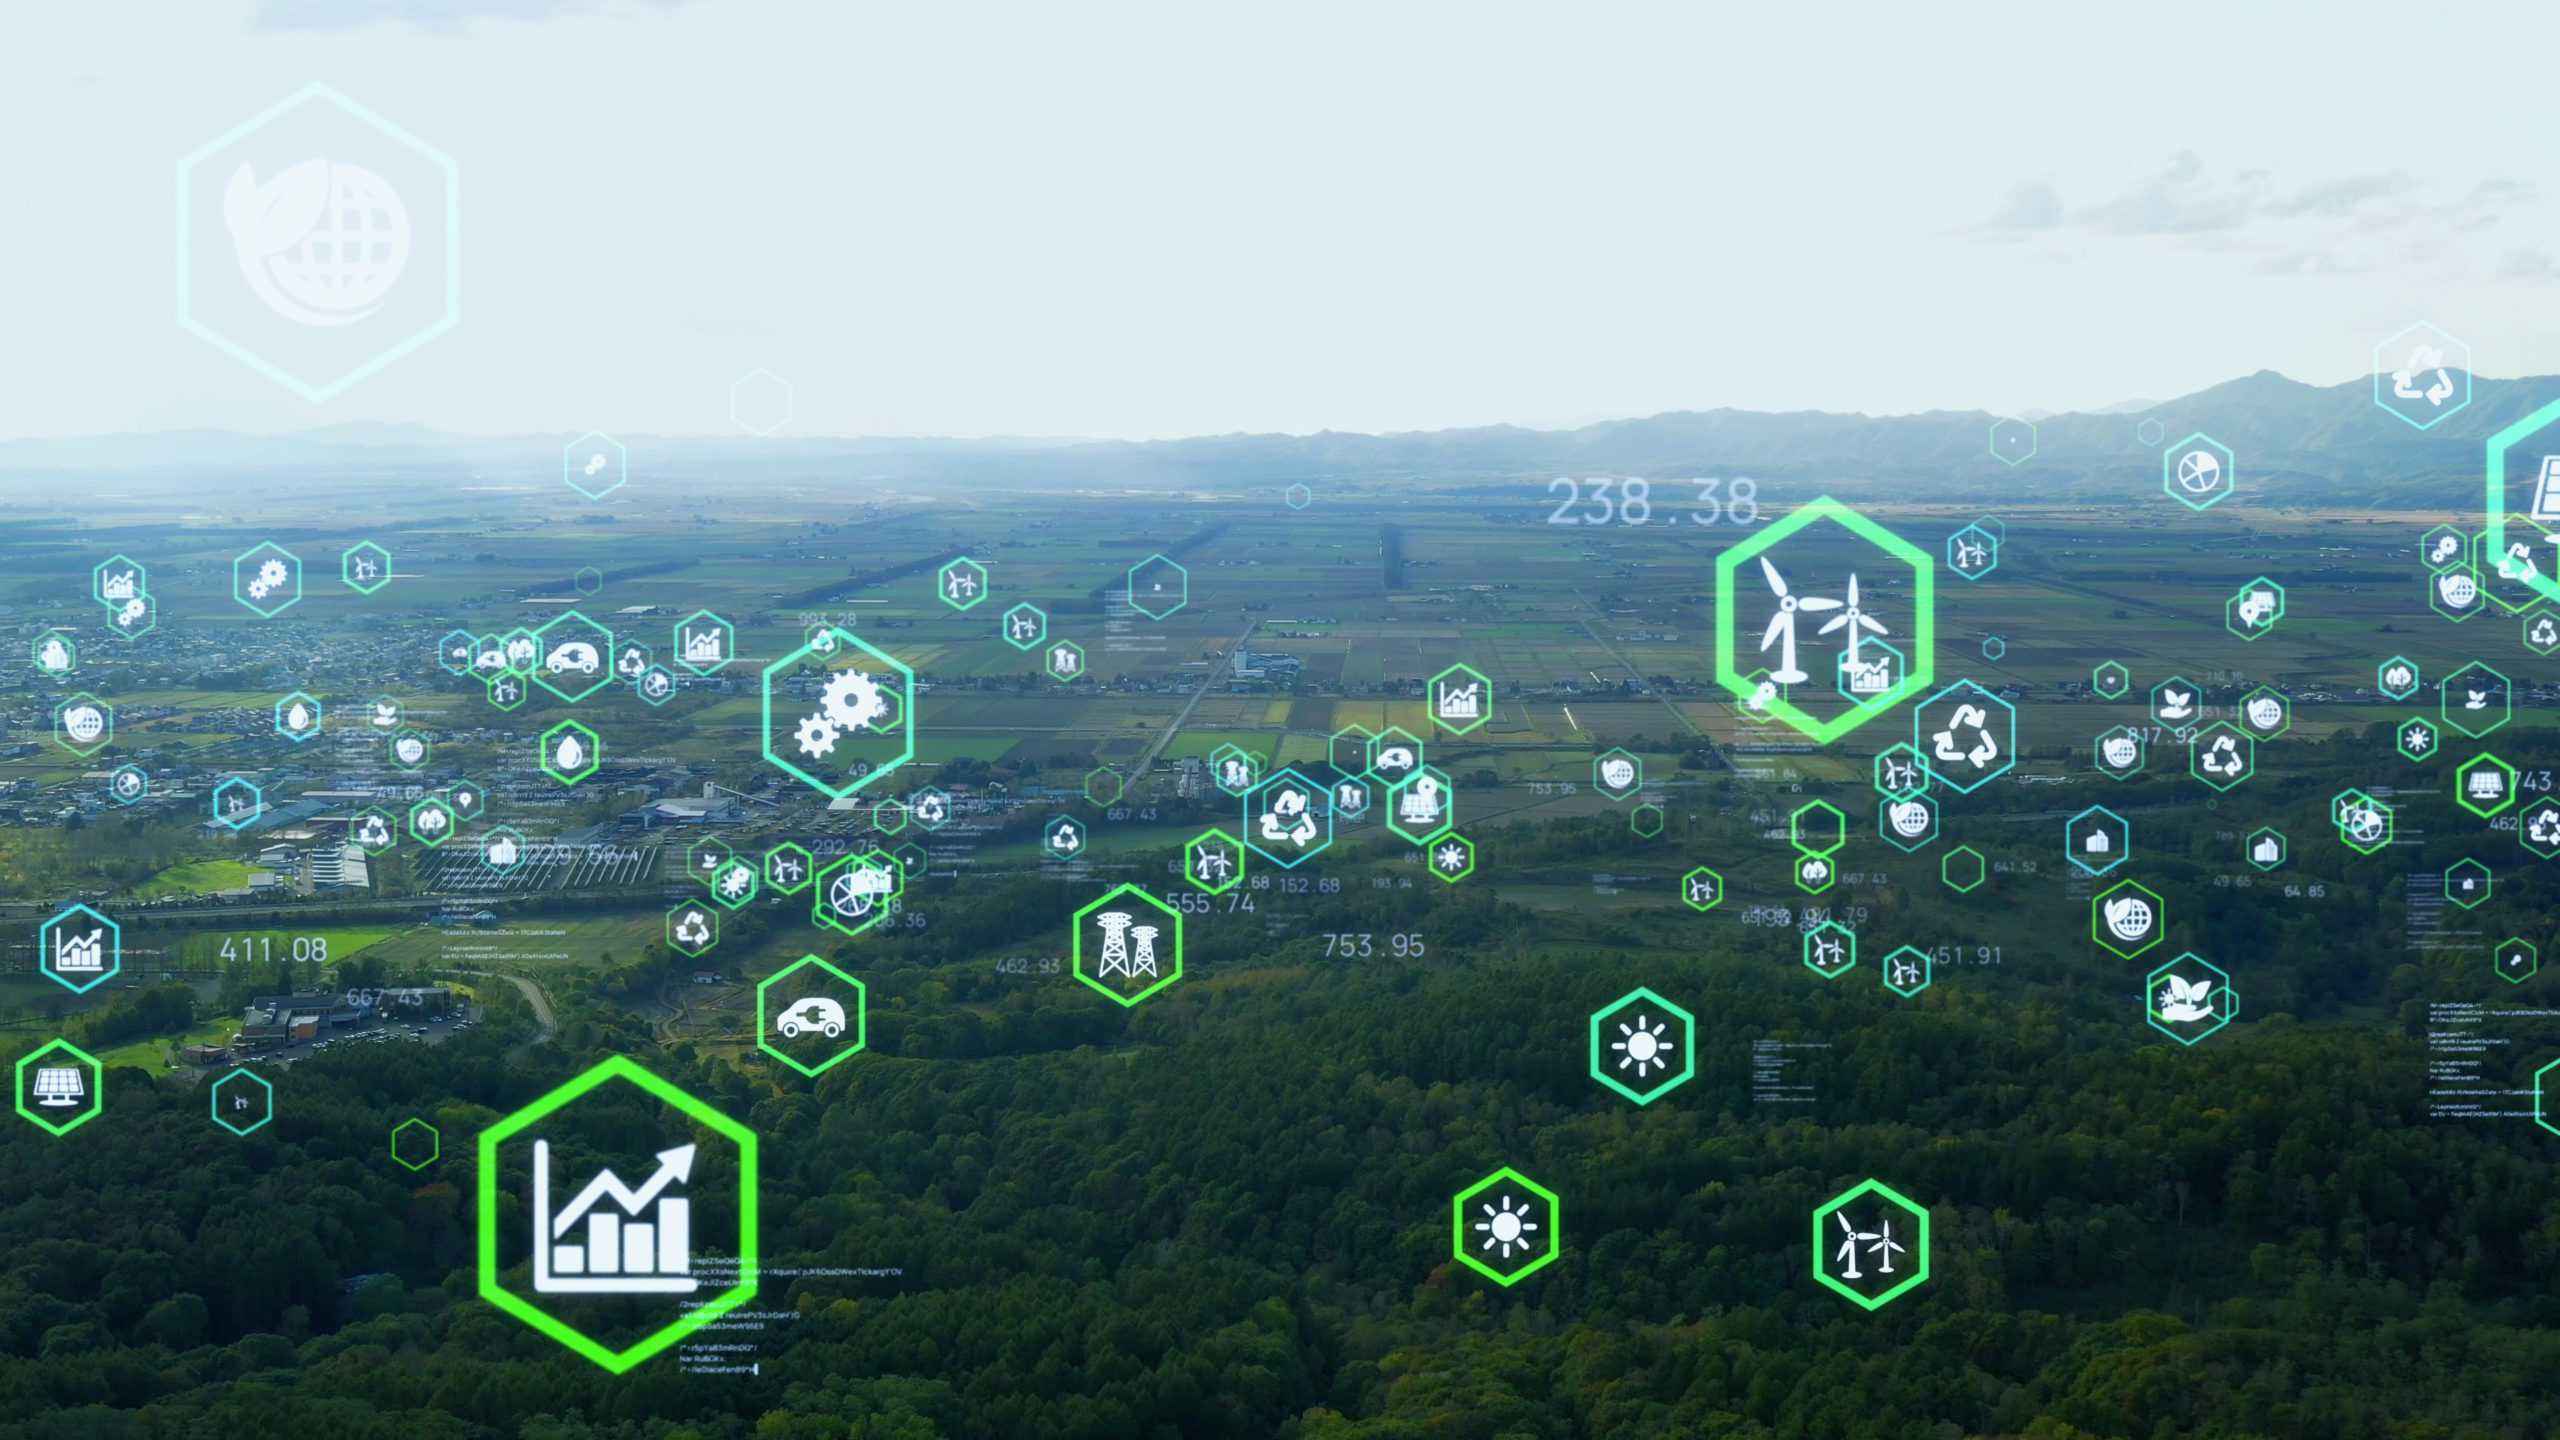 Wide green valley superimposed with many symbols, such as icons of wind turbines and the recycling symbol, enclosed in bright green hexagons